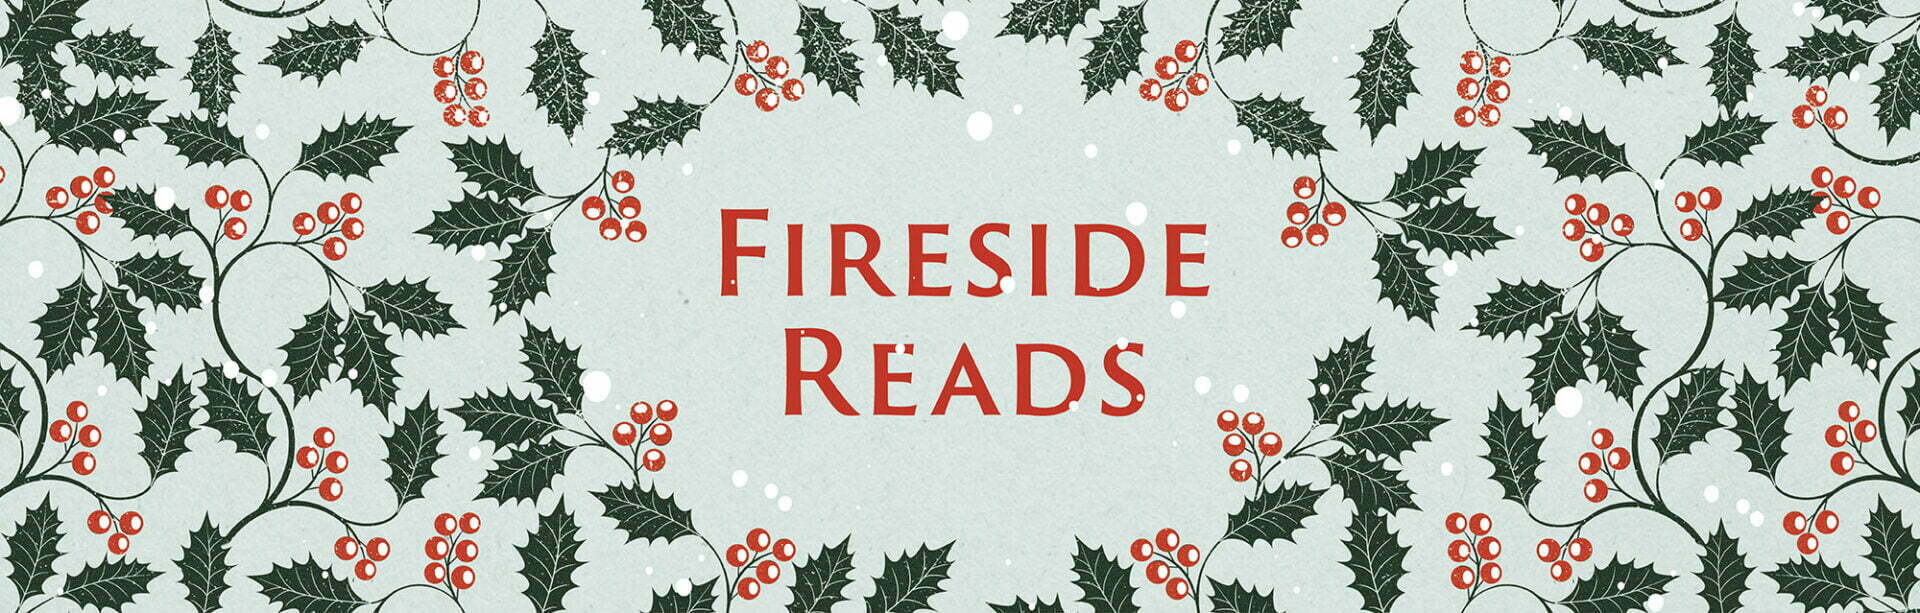 https://faber.wp.dev.diffusion.digital/wp-content/uploads/2021/11/Faber-Christmas-Gift-Guide-Fireside-Reads-1920x613.jpg